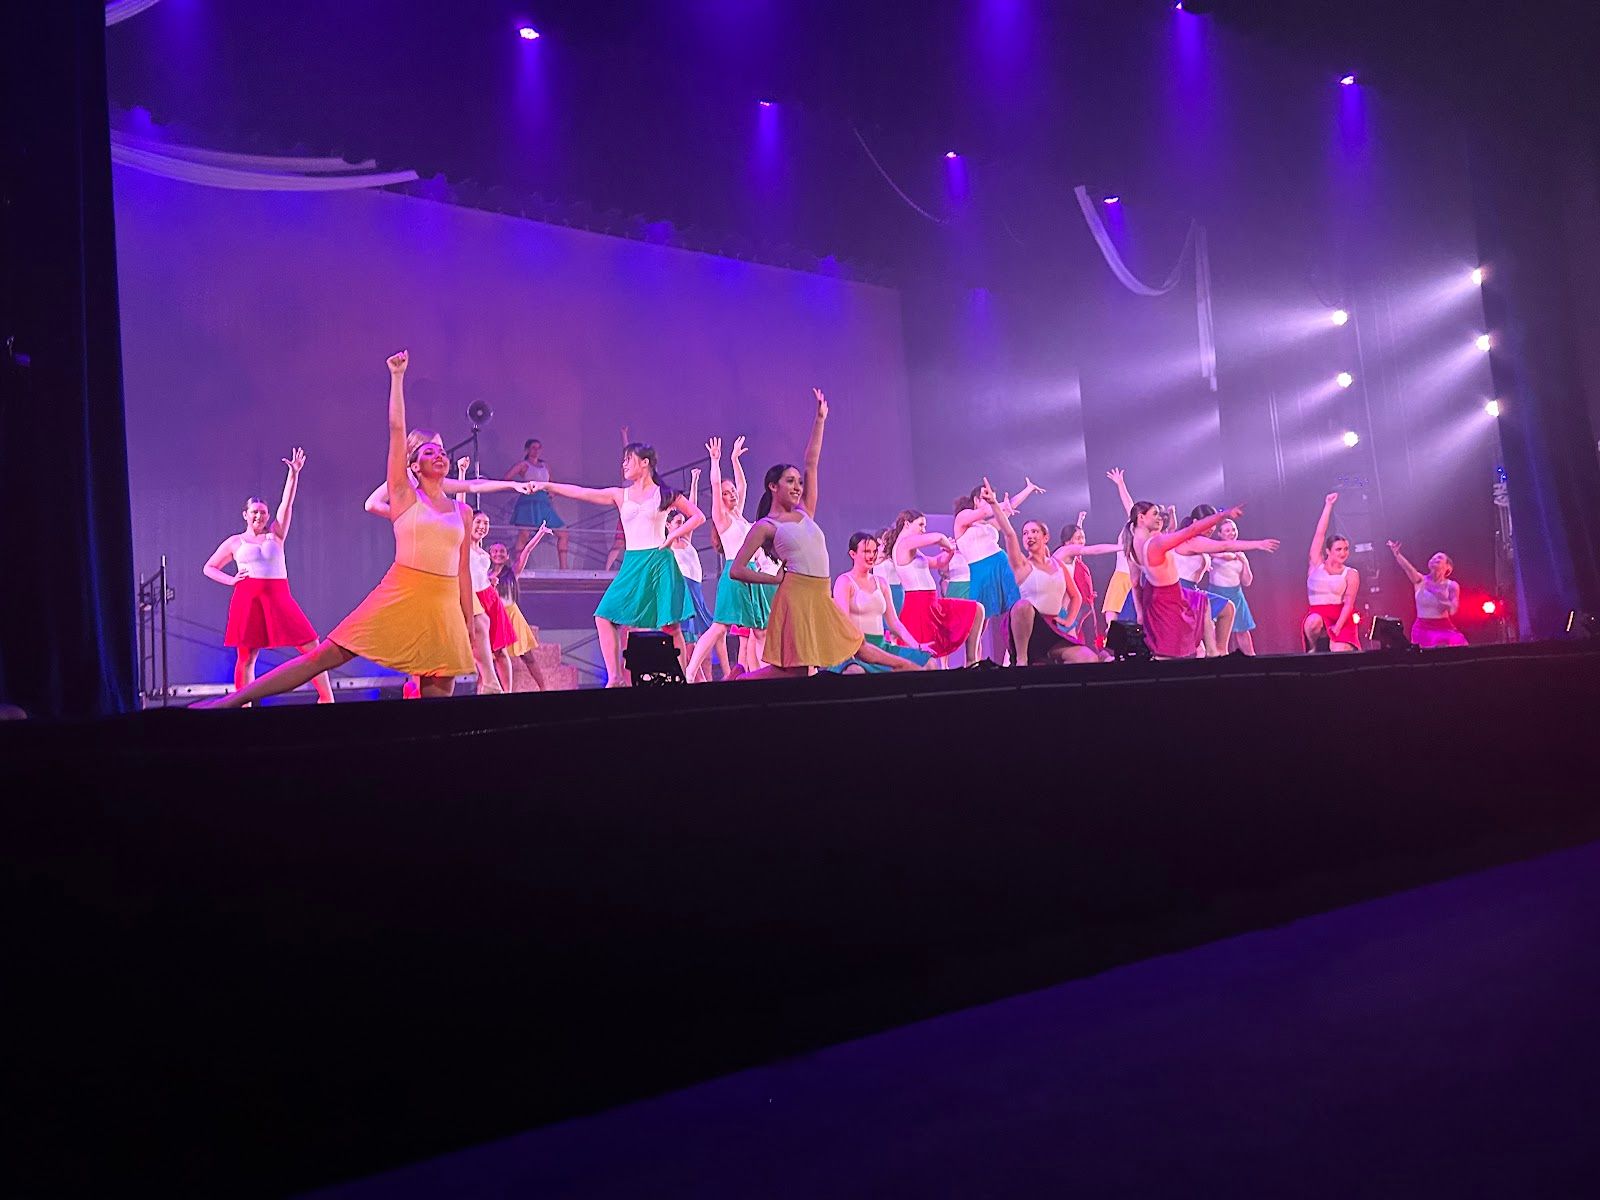 Dancers undo their plain costumes to reveal a rainbow of colored skirts. Photo by Bella Kim